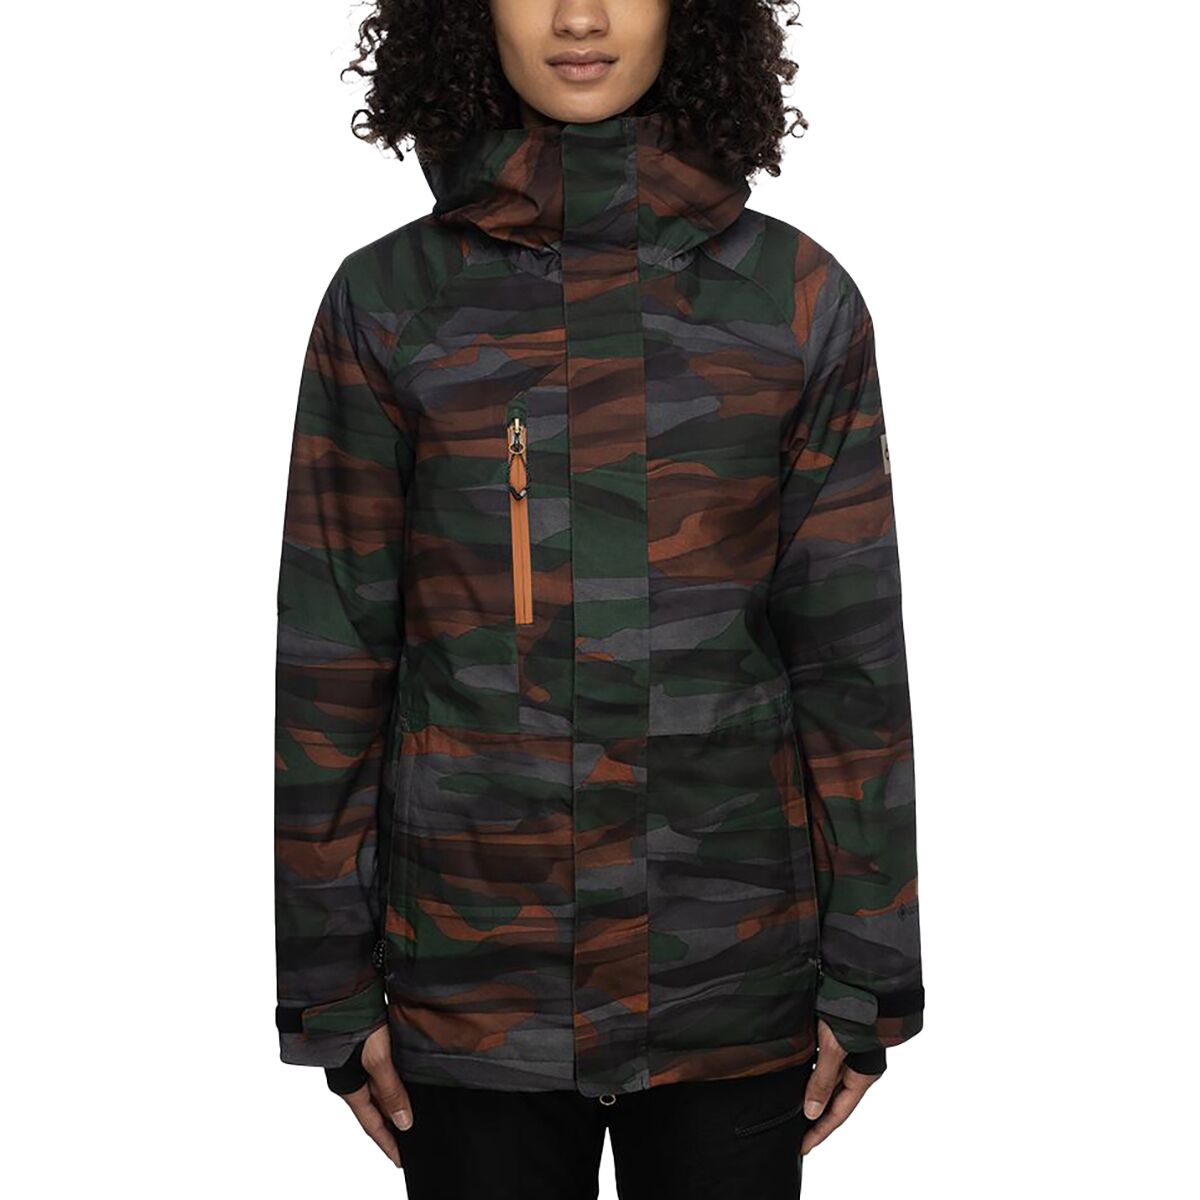 686 GLCR GORE-TEX Willow Insulated Jacket - Women's Red Clay Waterland Camo